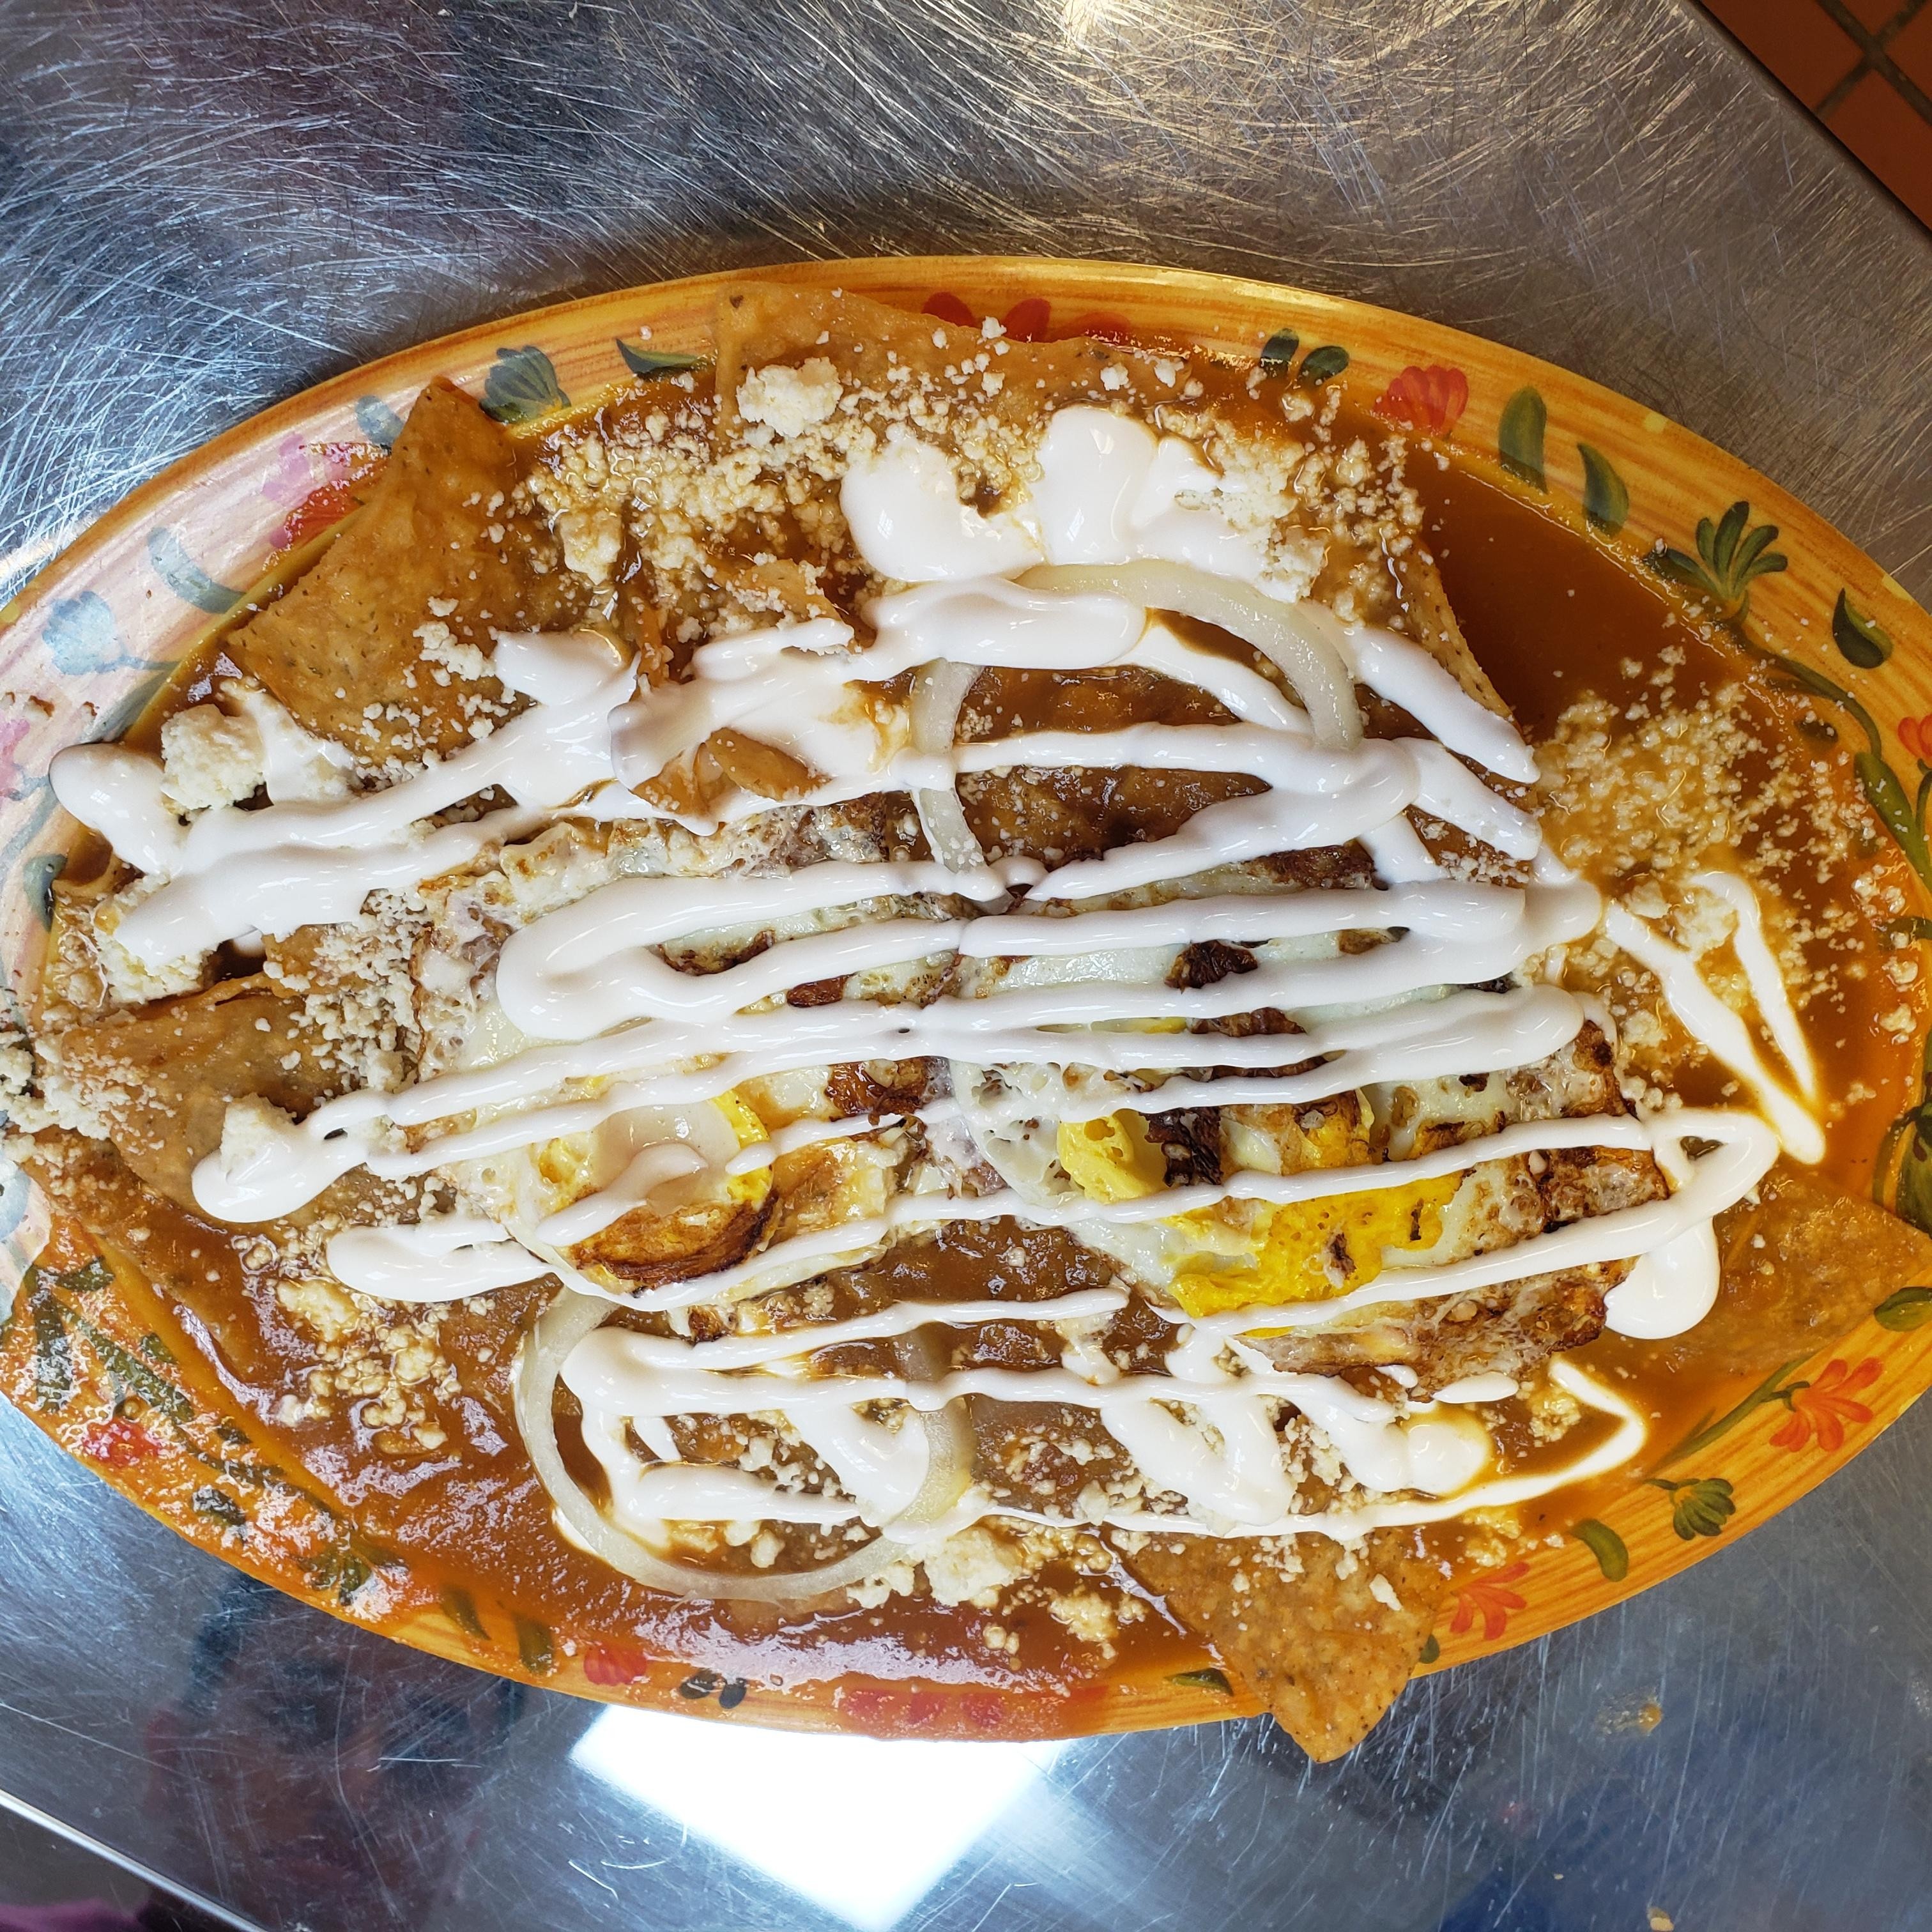 Chilaquiles with eggs